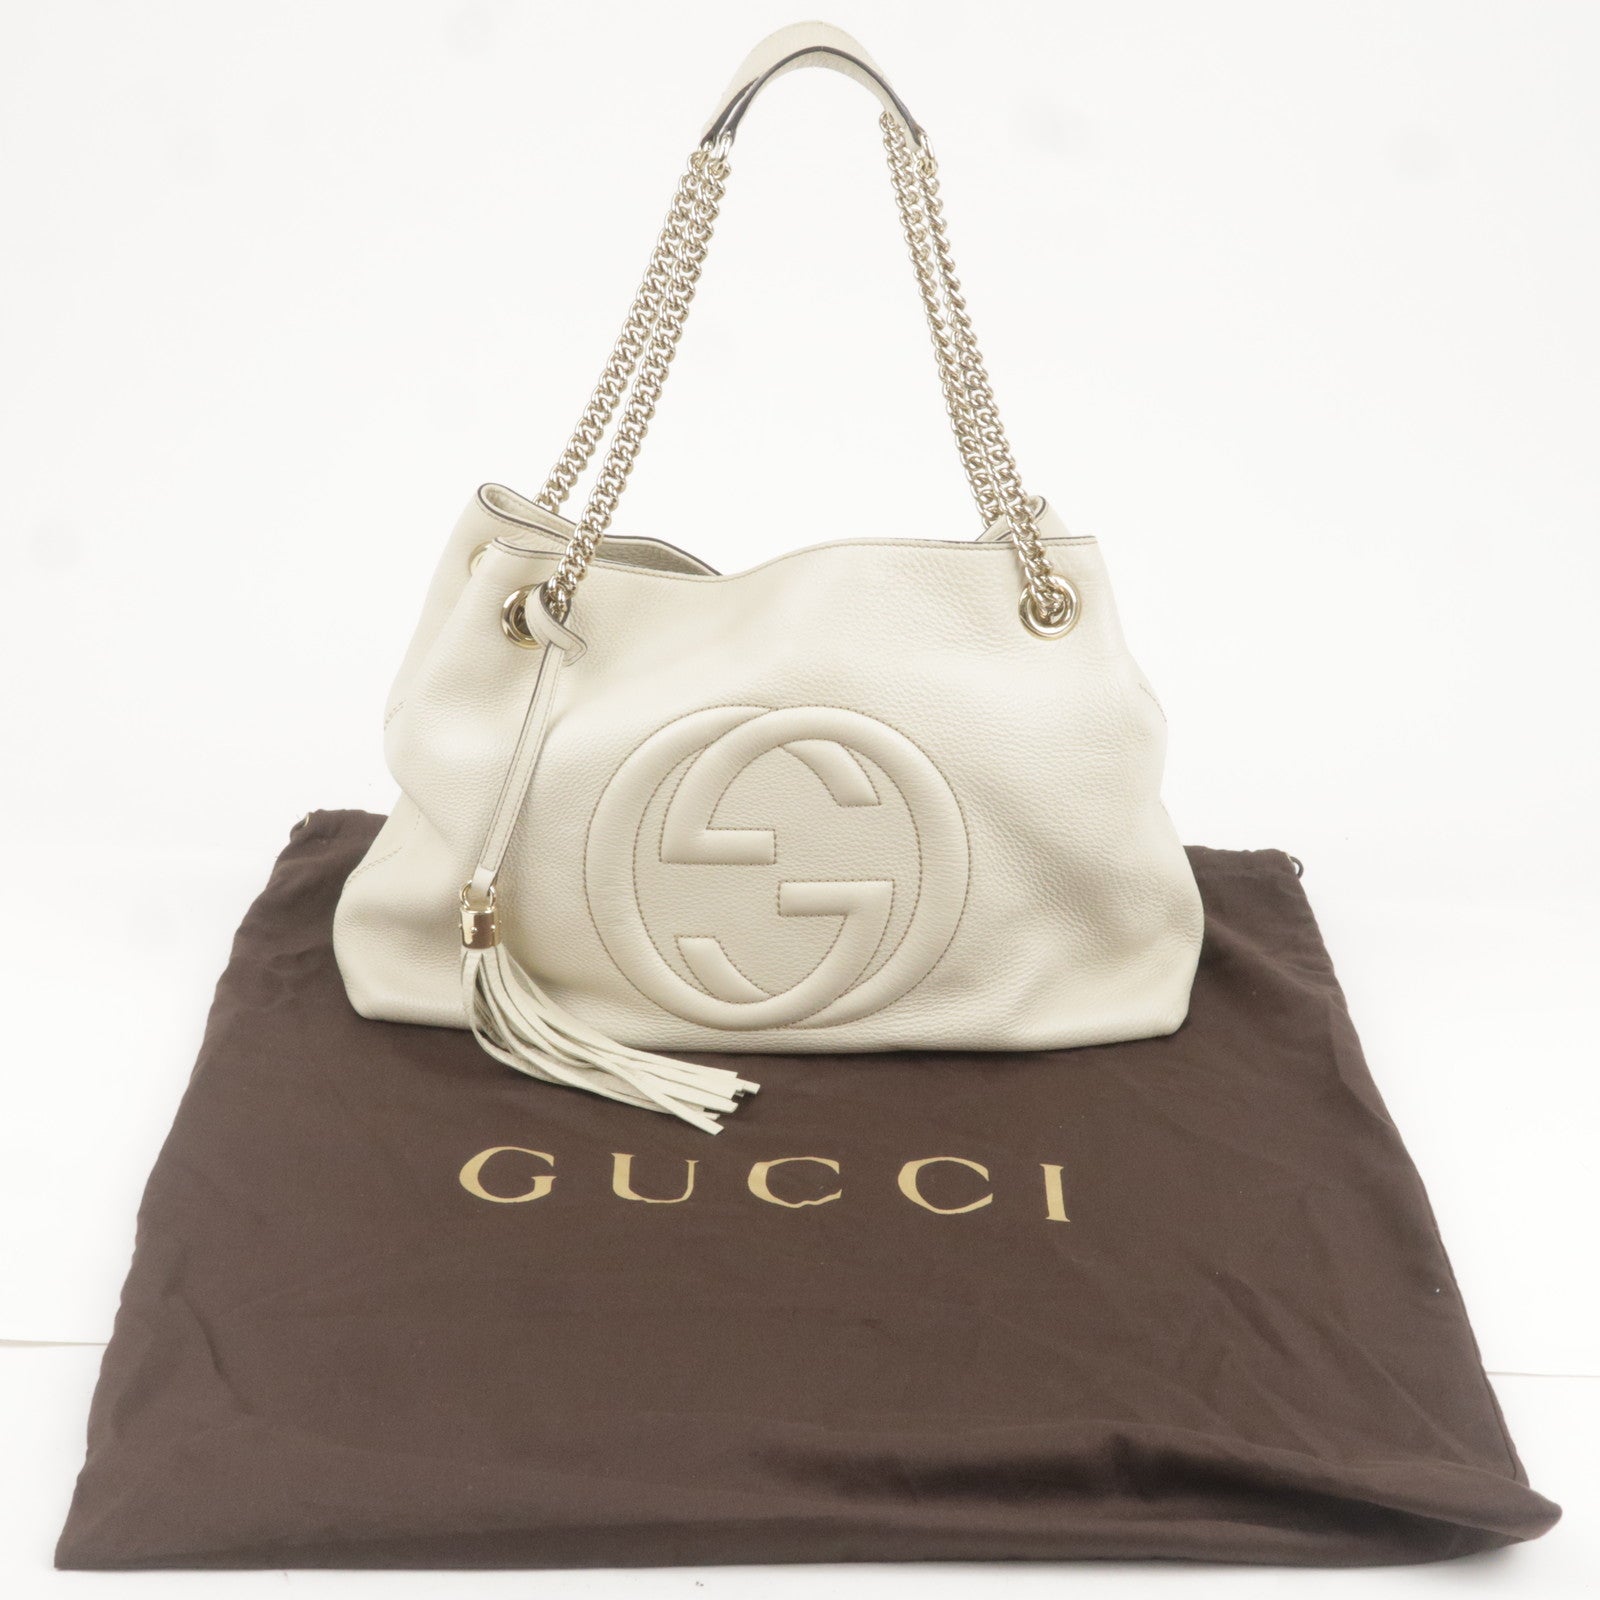 Authentic-GUCCI-SOHO-Leather-Chain-Shoulder-Bag-Tote-Bag-Ivory-308982-Used-F/S